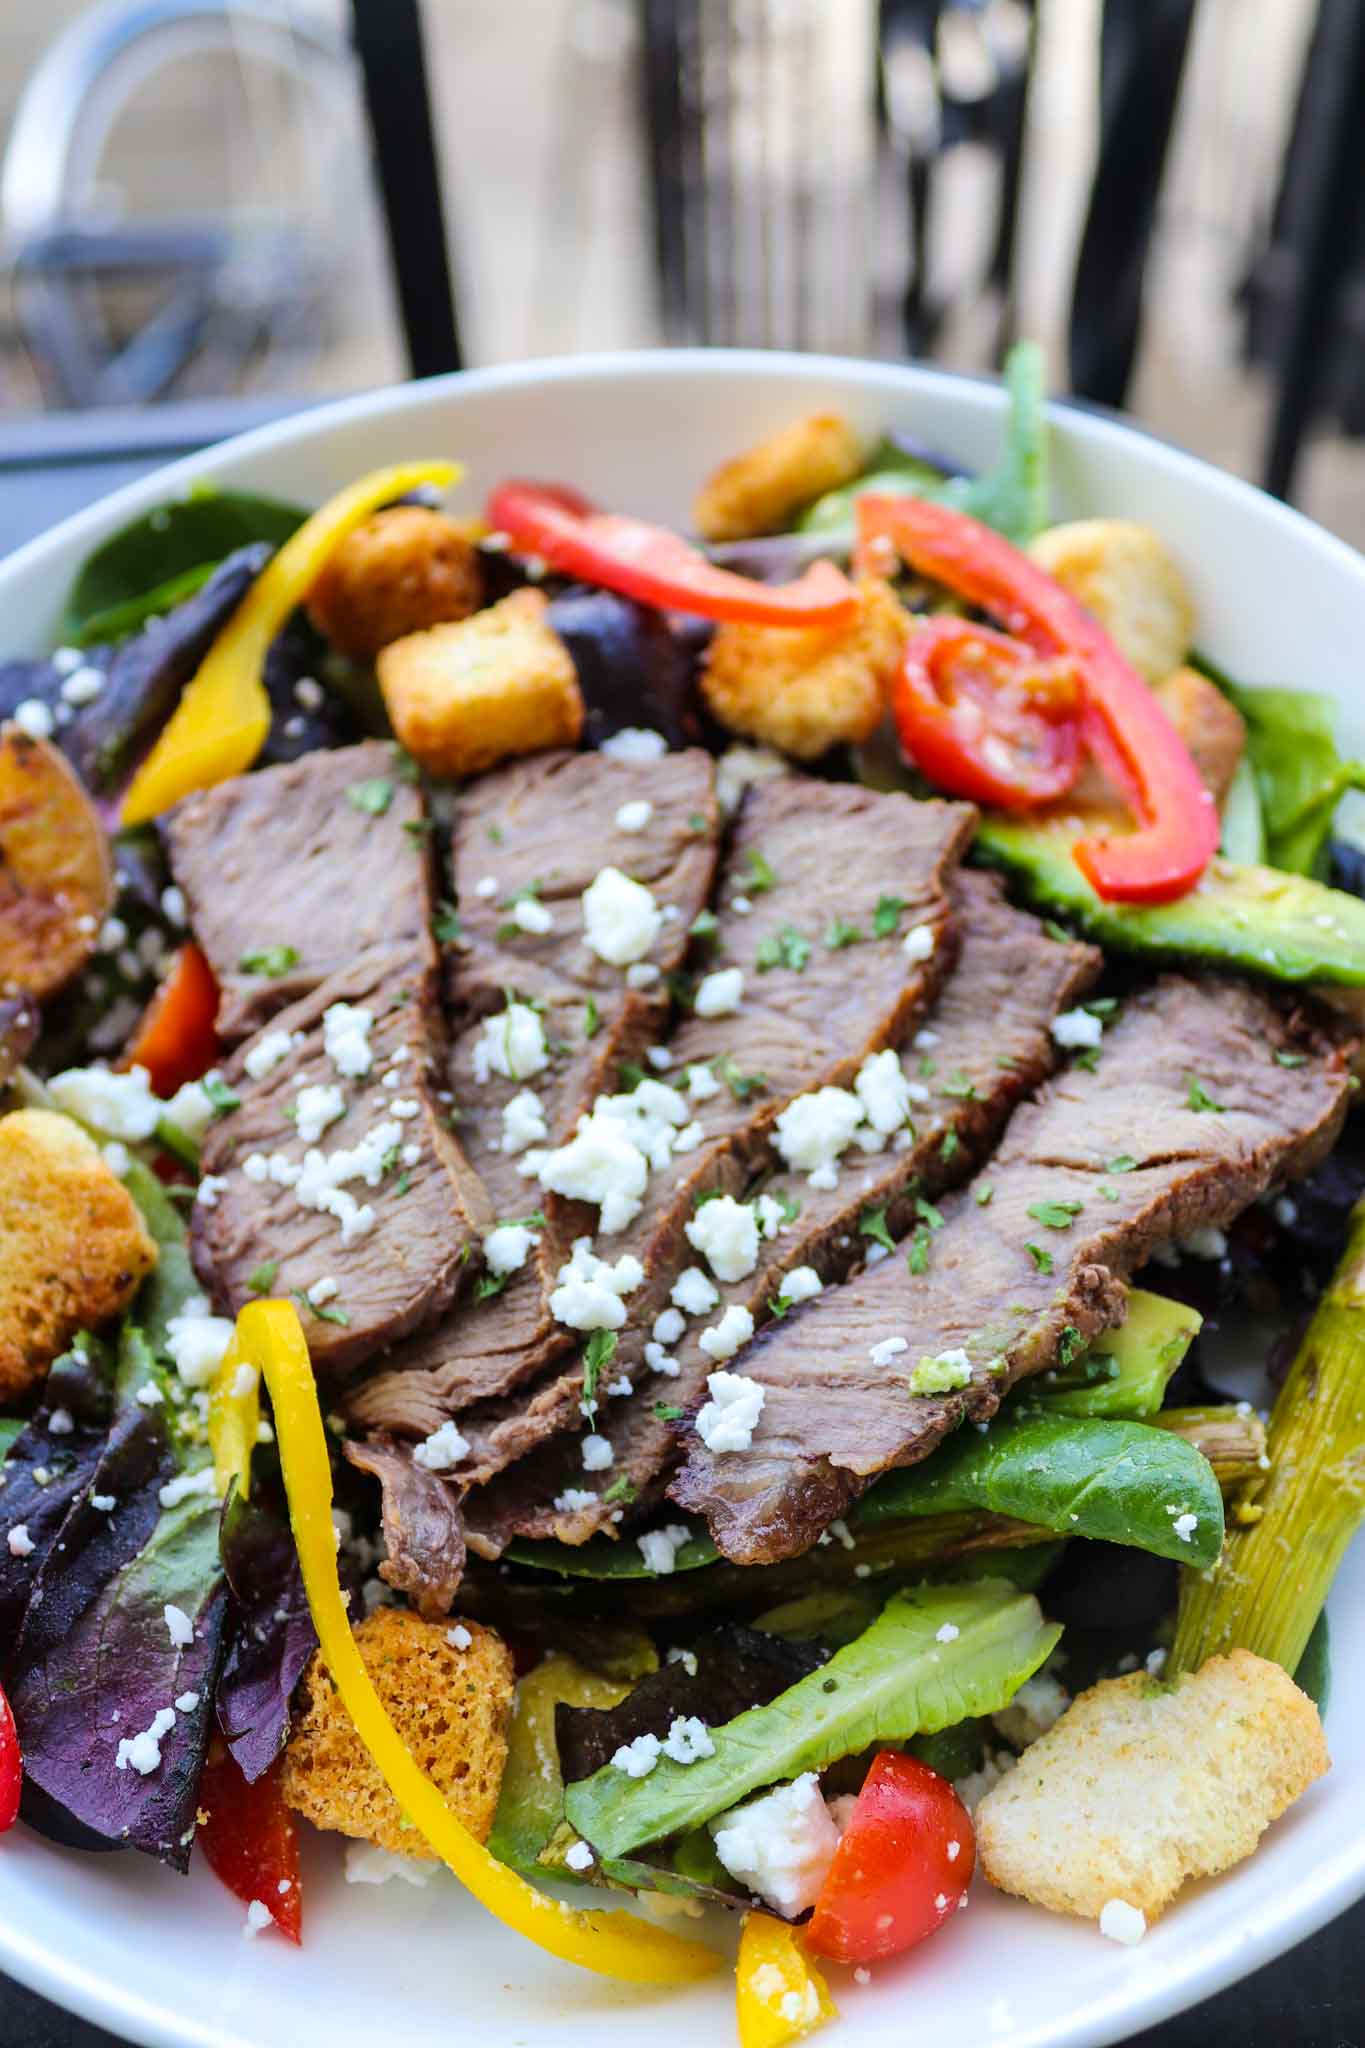 Easy Grilled Steak Salad Recipe With Avocado